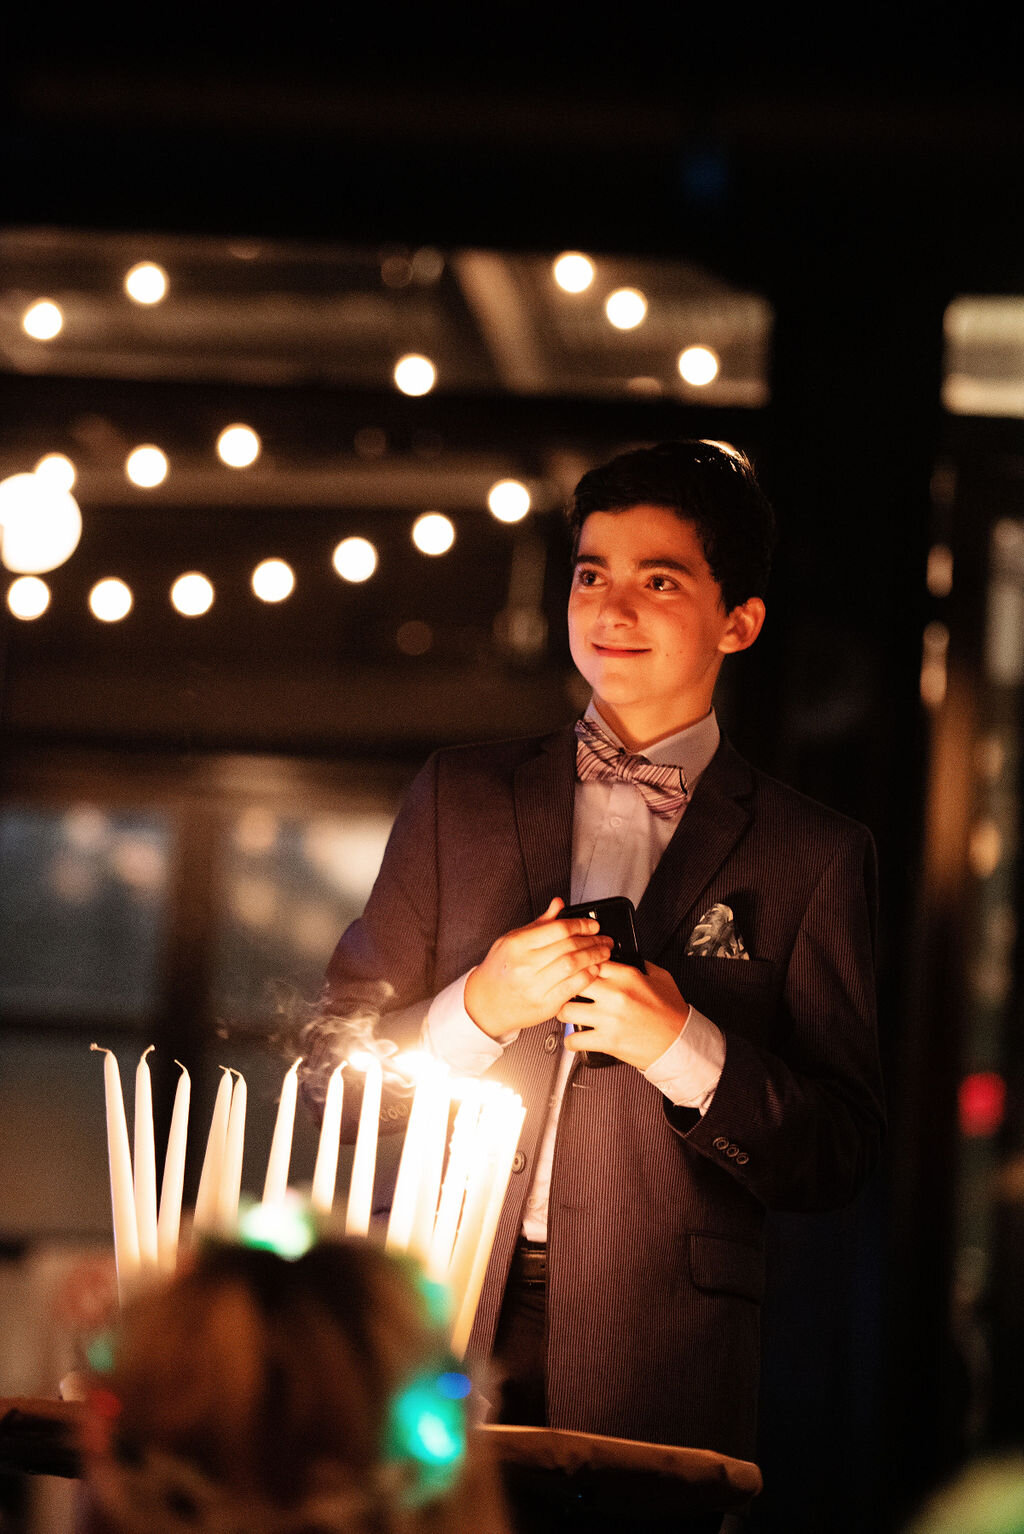  Bar Mitzvah Ceremony and Party at 501 Union 